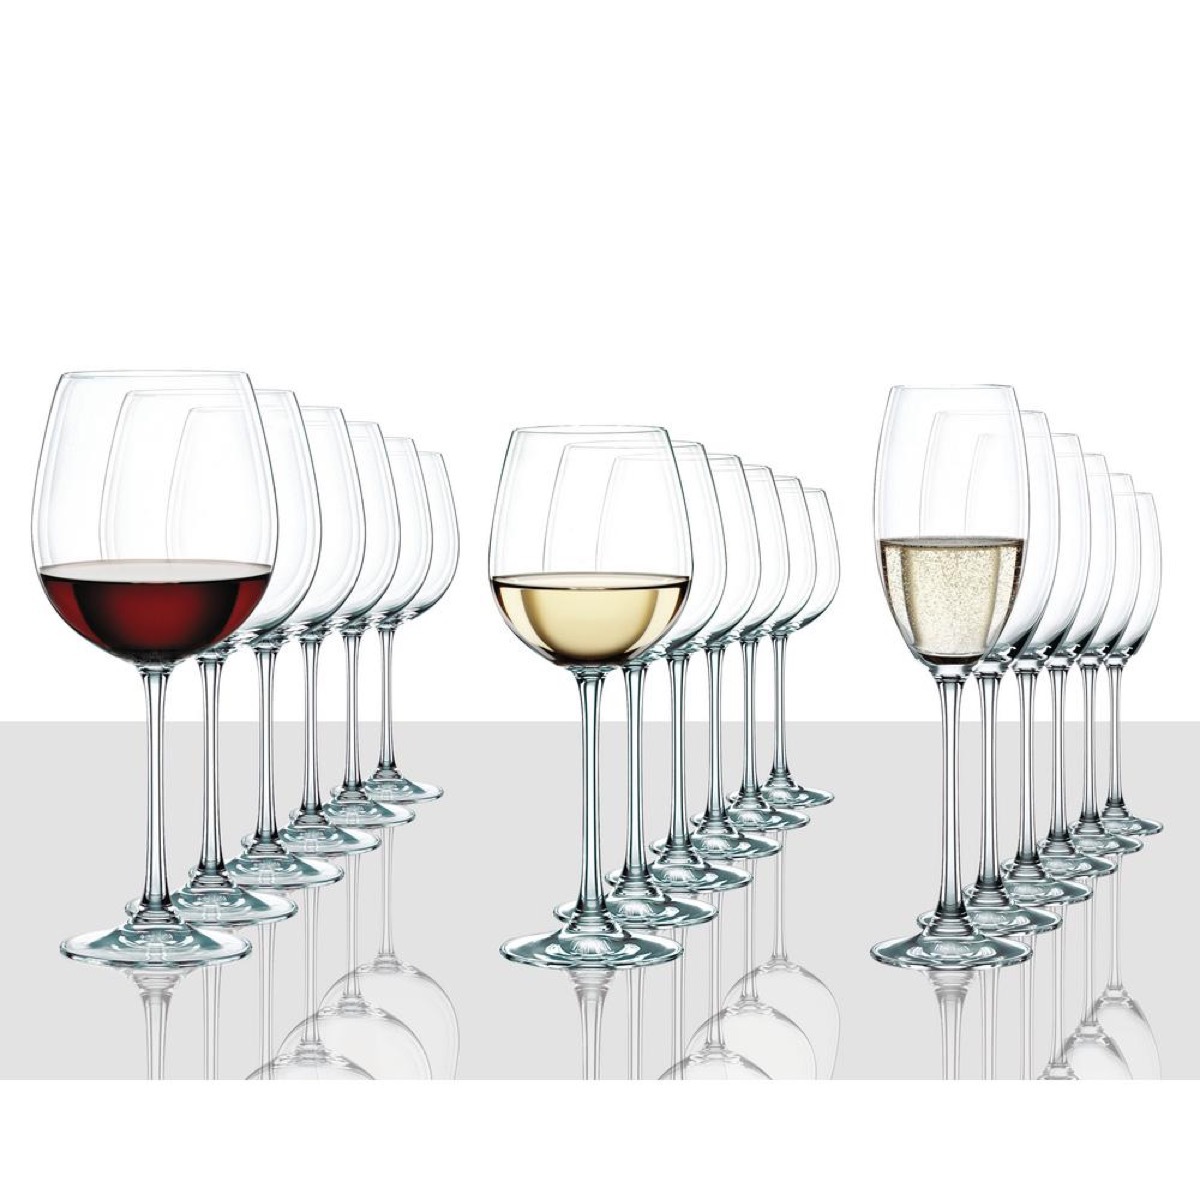 Wine glasses and champagne flutes